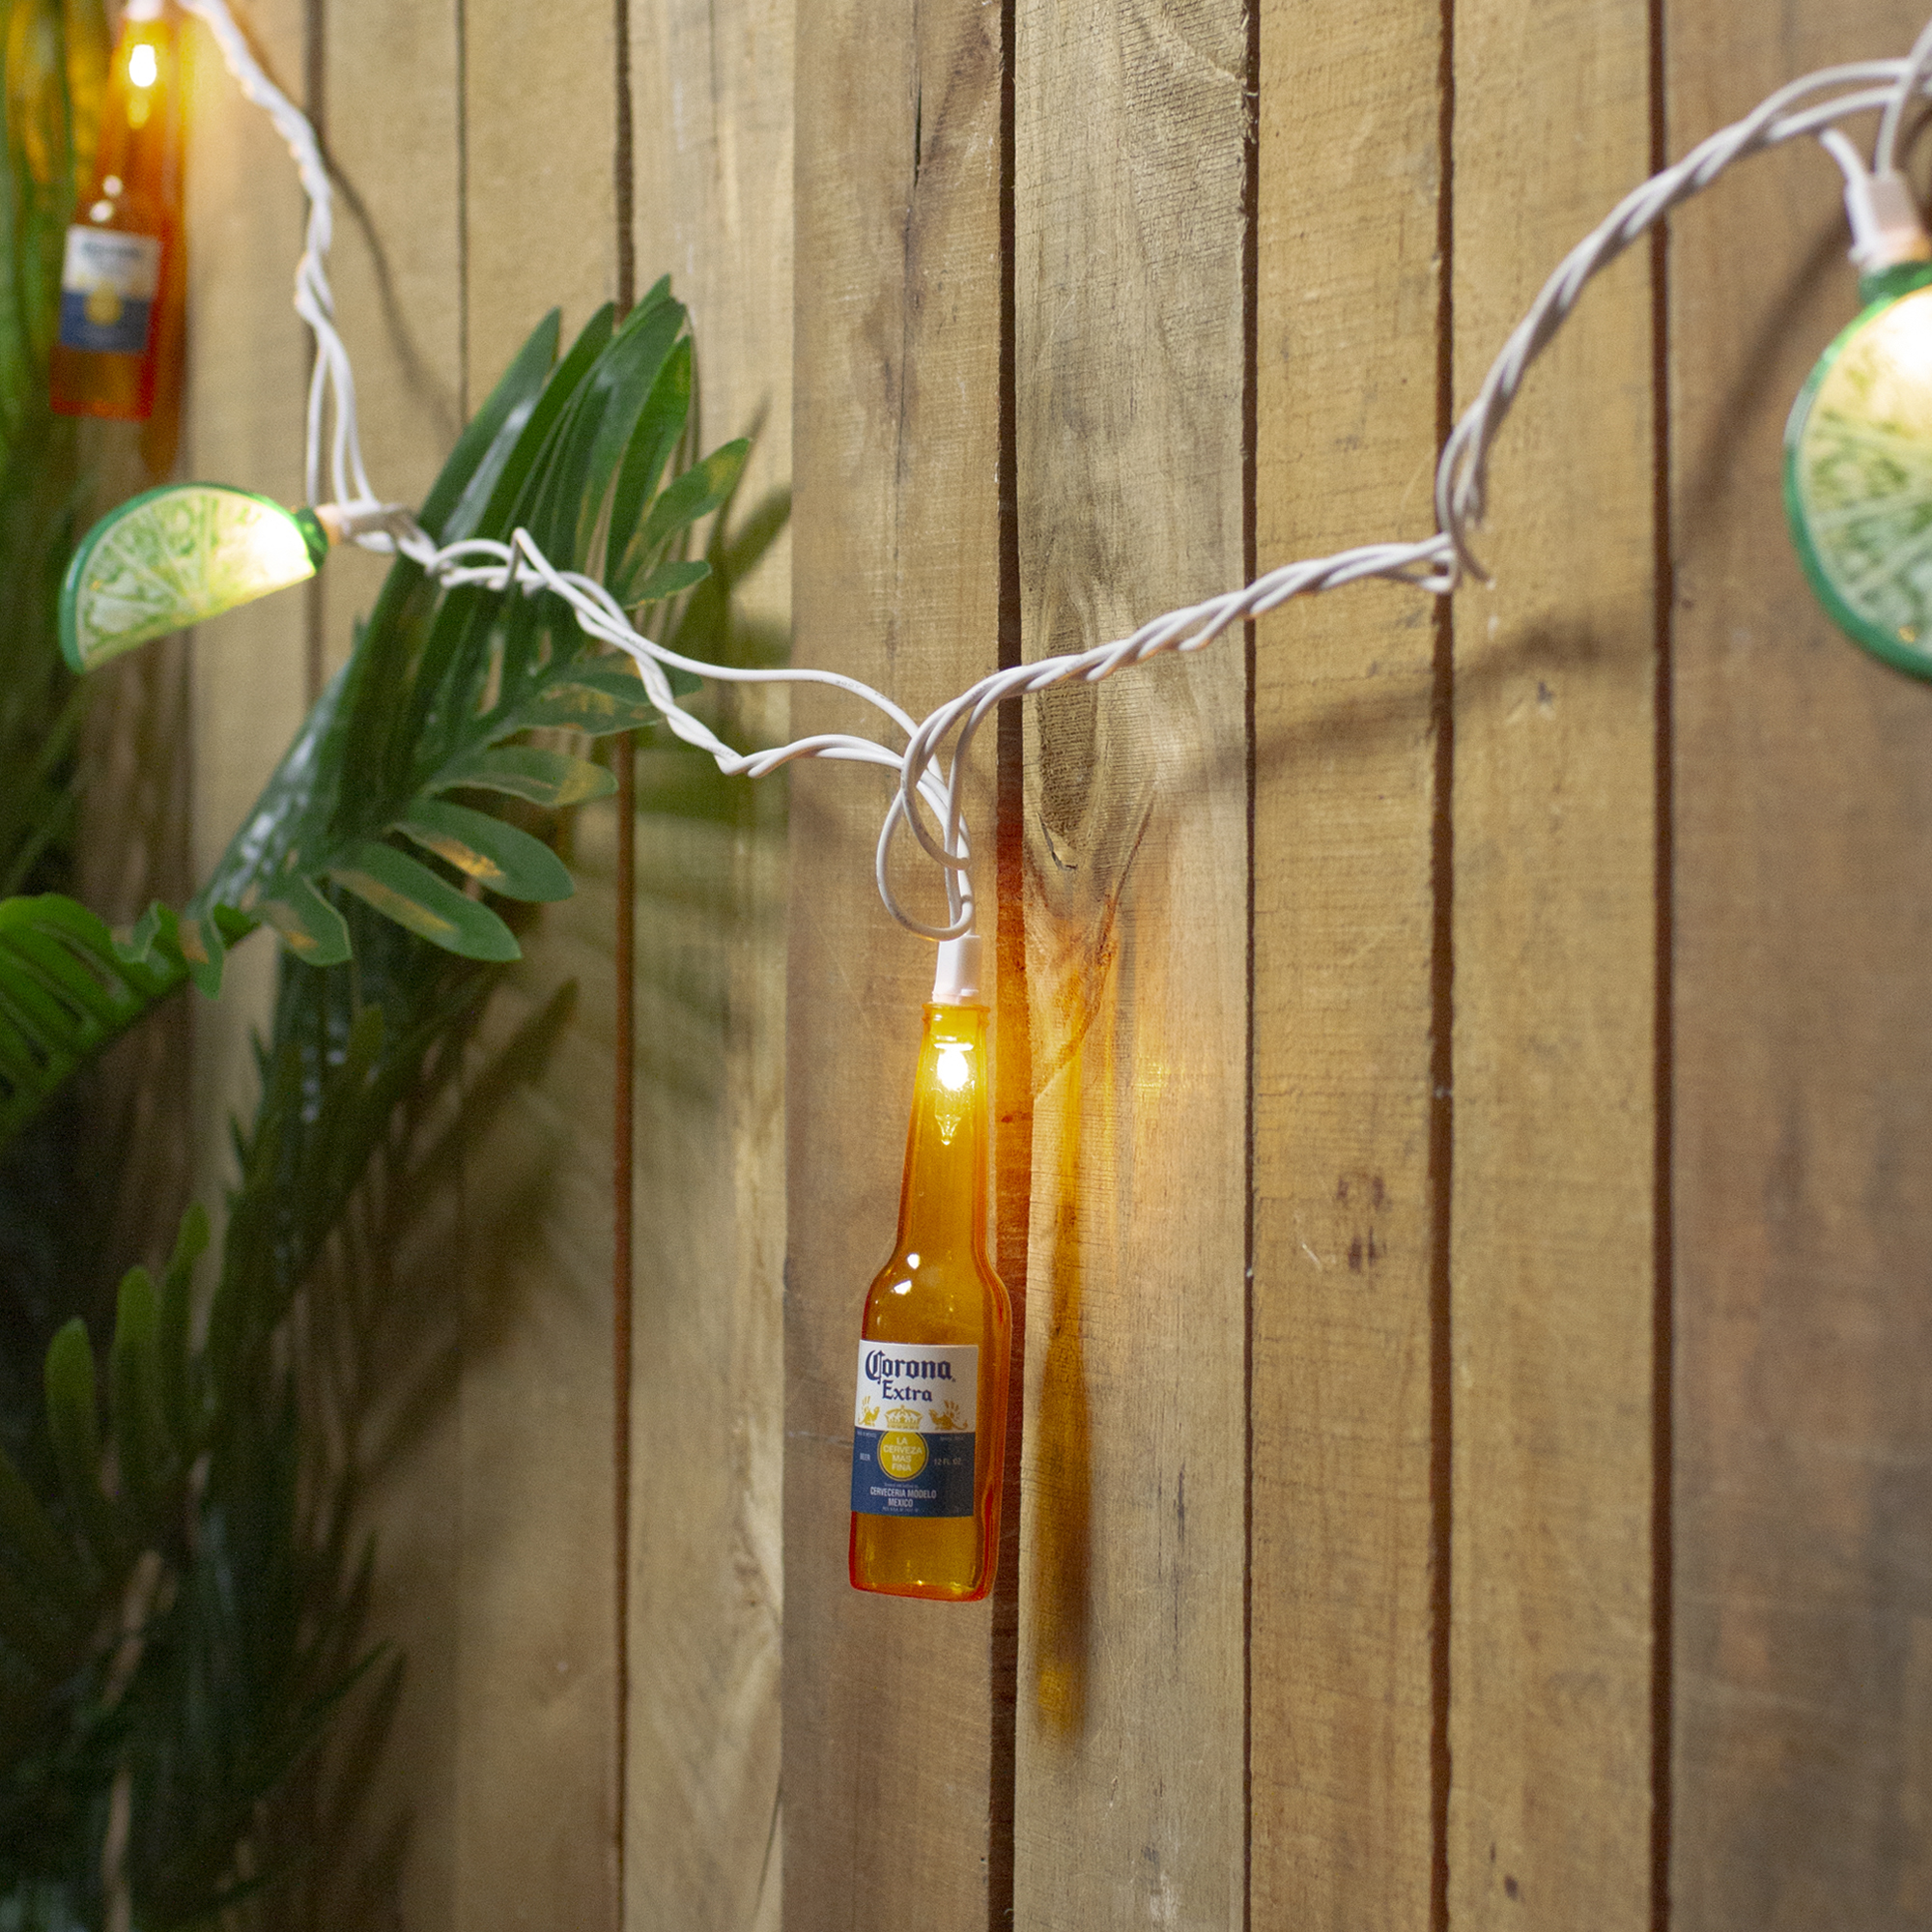 Northlight 10-Count Corona Extra Beer Bottle and Lime Summer Patio Lights - 9ft White Wire